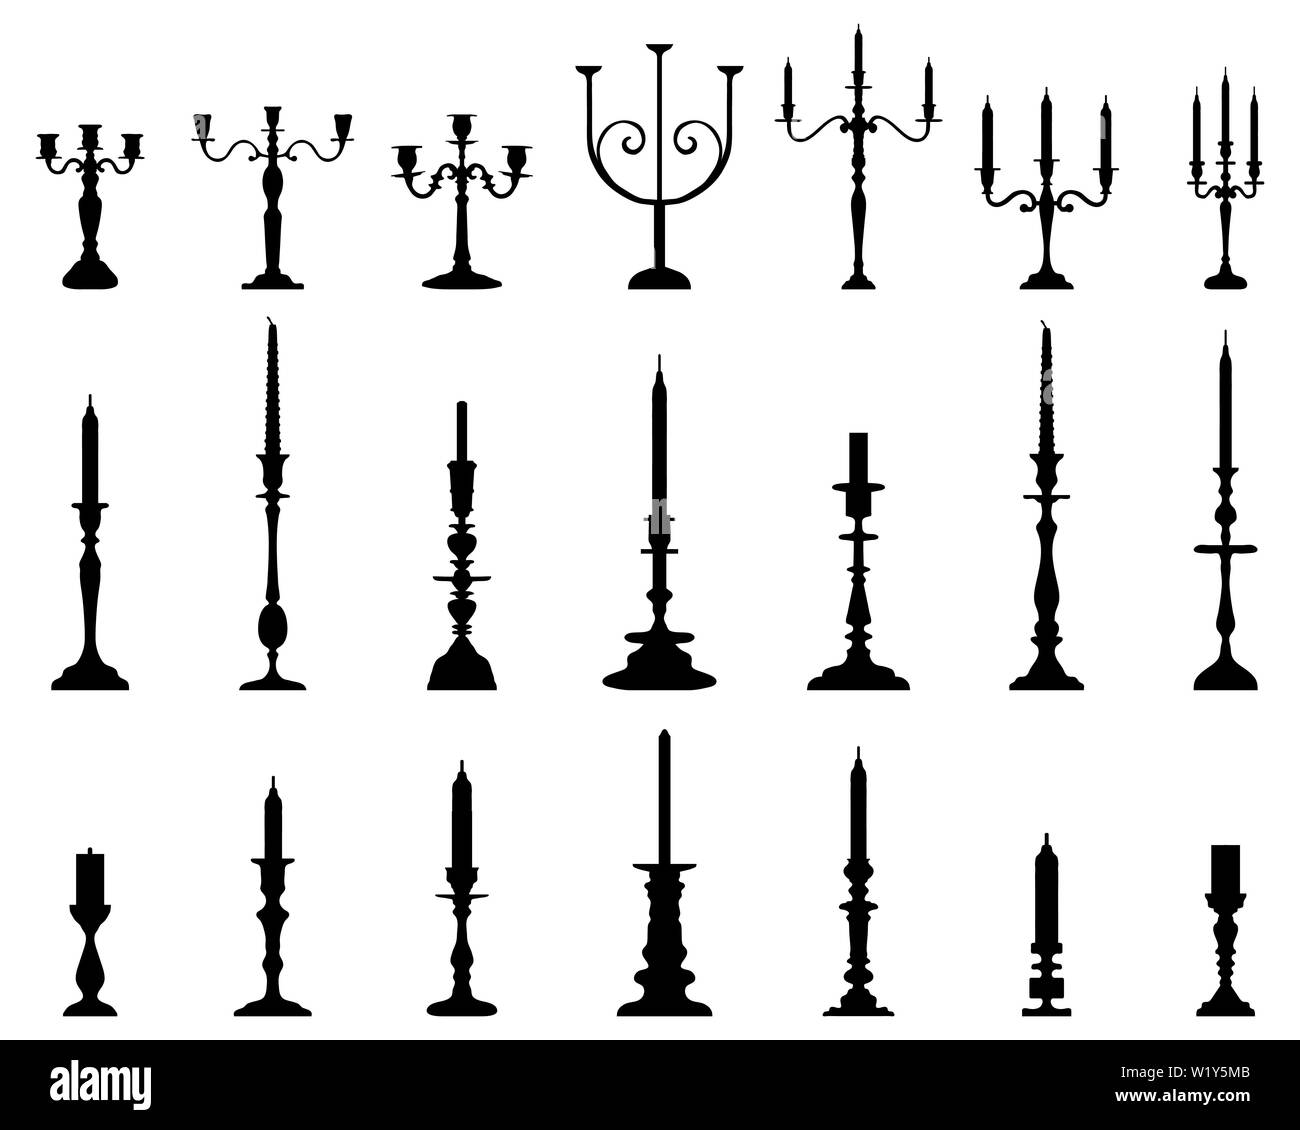 Black silhouettes of candlesticks on a white background Stock Photo